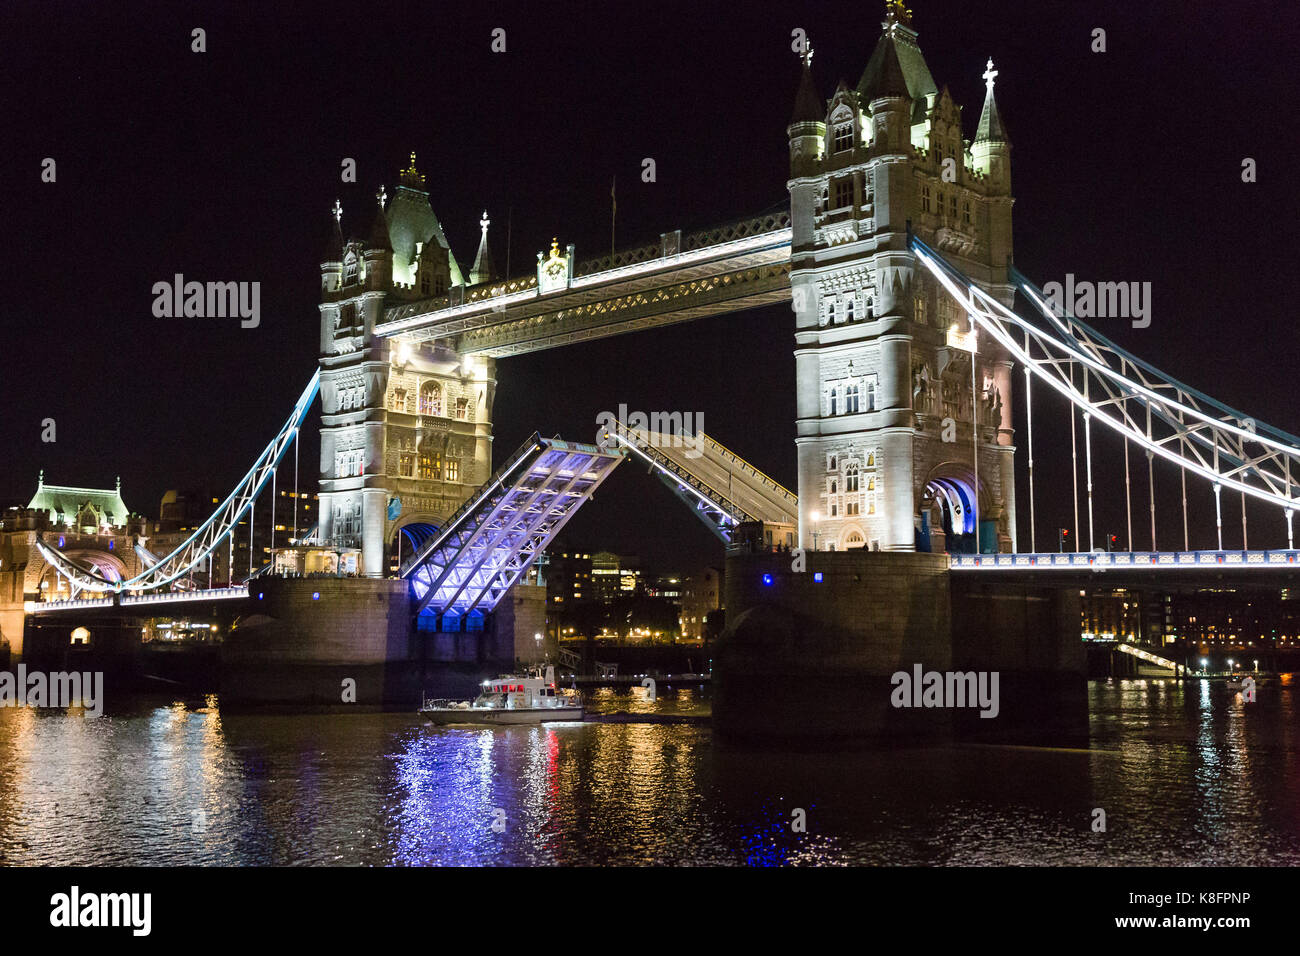 London, UK. 19th Sep, 2017. Royal Navy ship, HMS Puncher sails under a raised Tower Bridge on the River Thames to mark a change in command of the Royal Navy Reserve (RNR) following an official ceremony at HMS President, where Commander John Harriman handed over command of HMS President RNR to Commander Richmal Hardinge. Credit: Vickie Flores/Alamy Live News Stock Photo